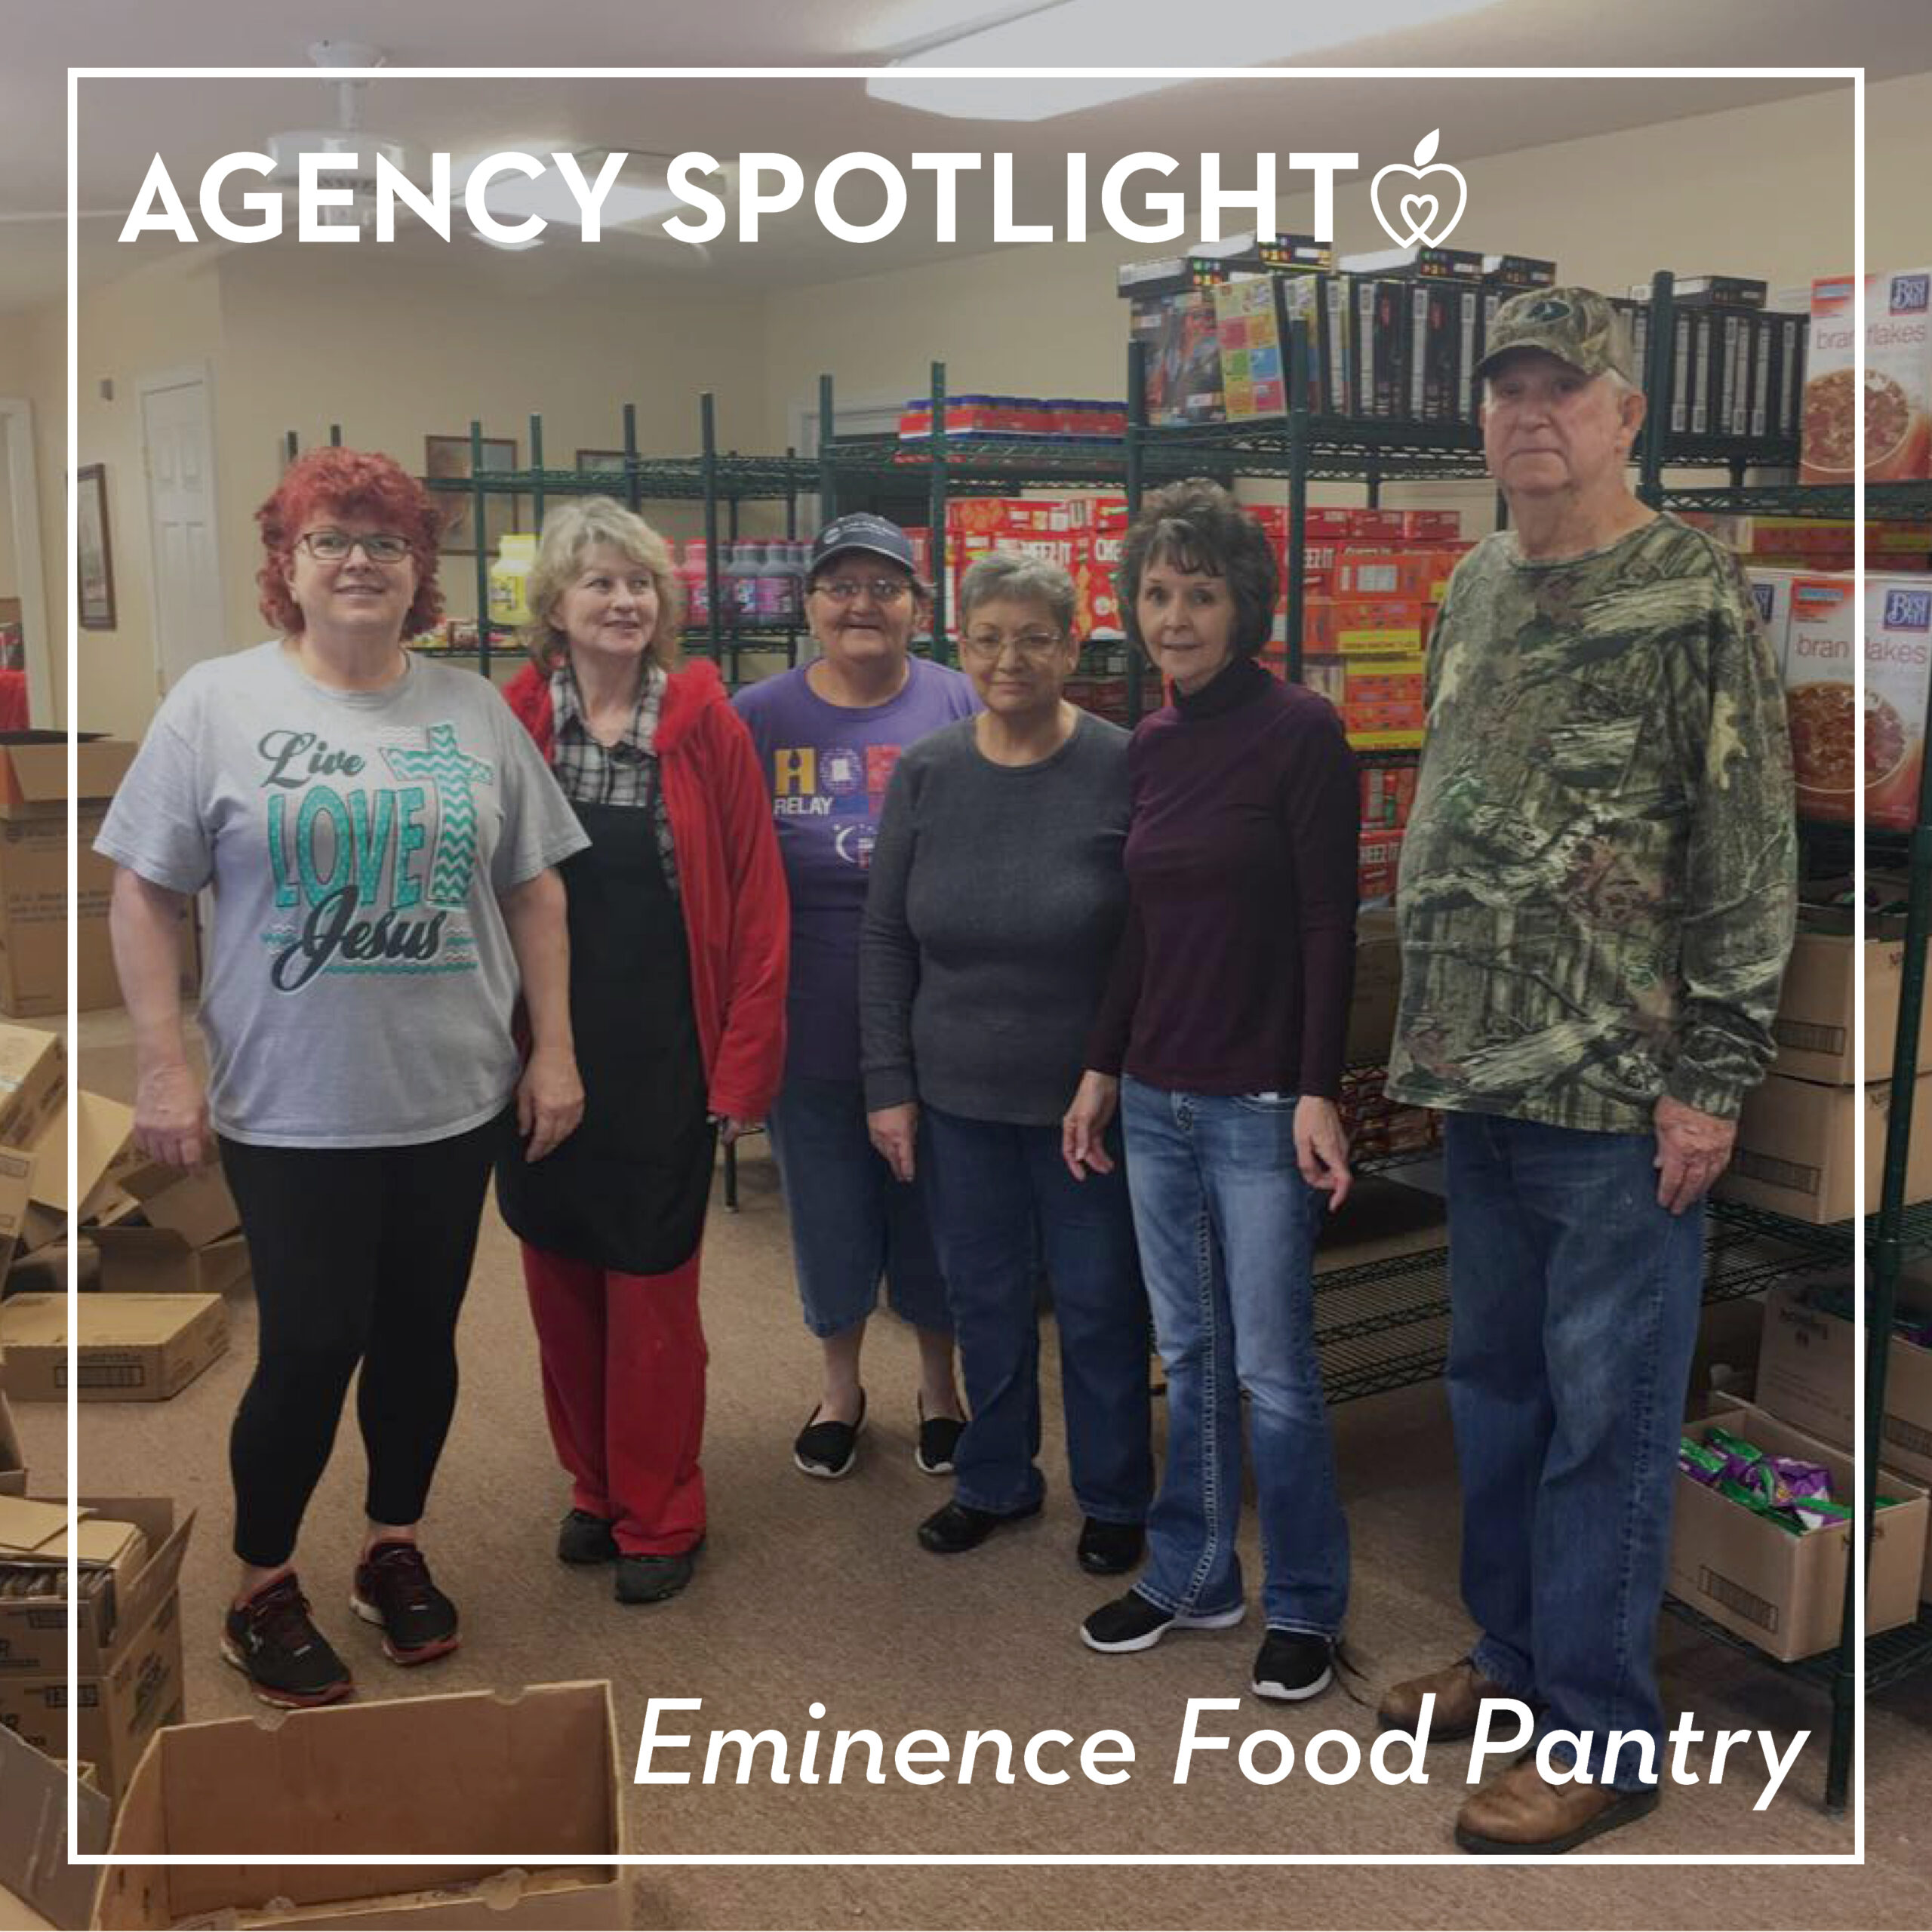 Eminence Food Pantry: Serving Neighbors with Full Hearts